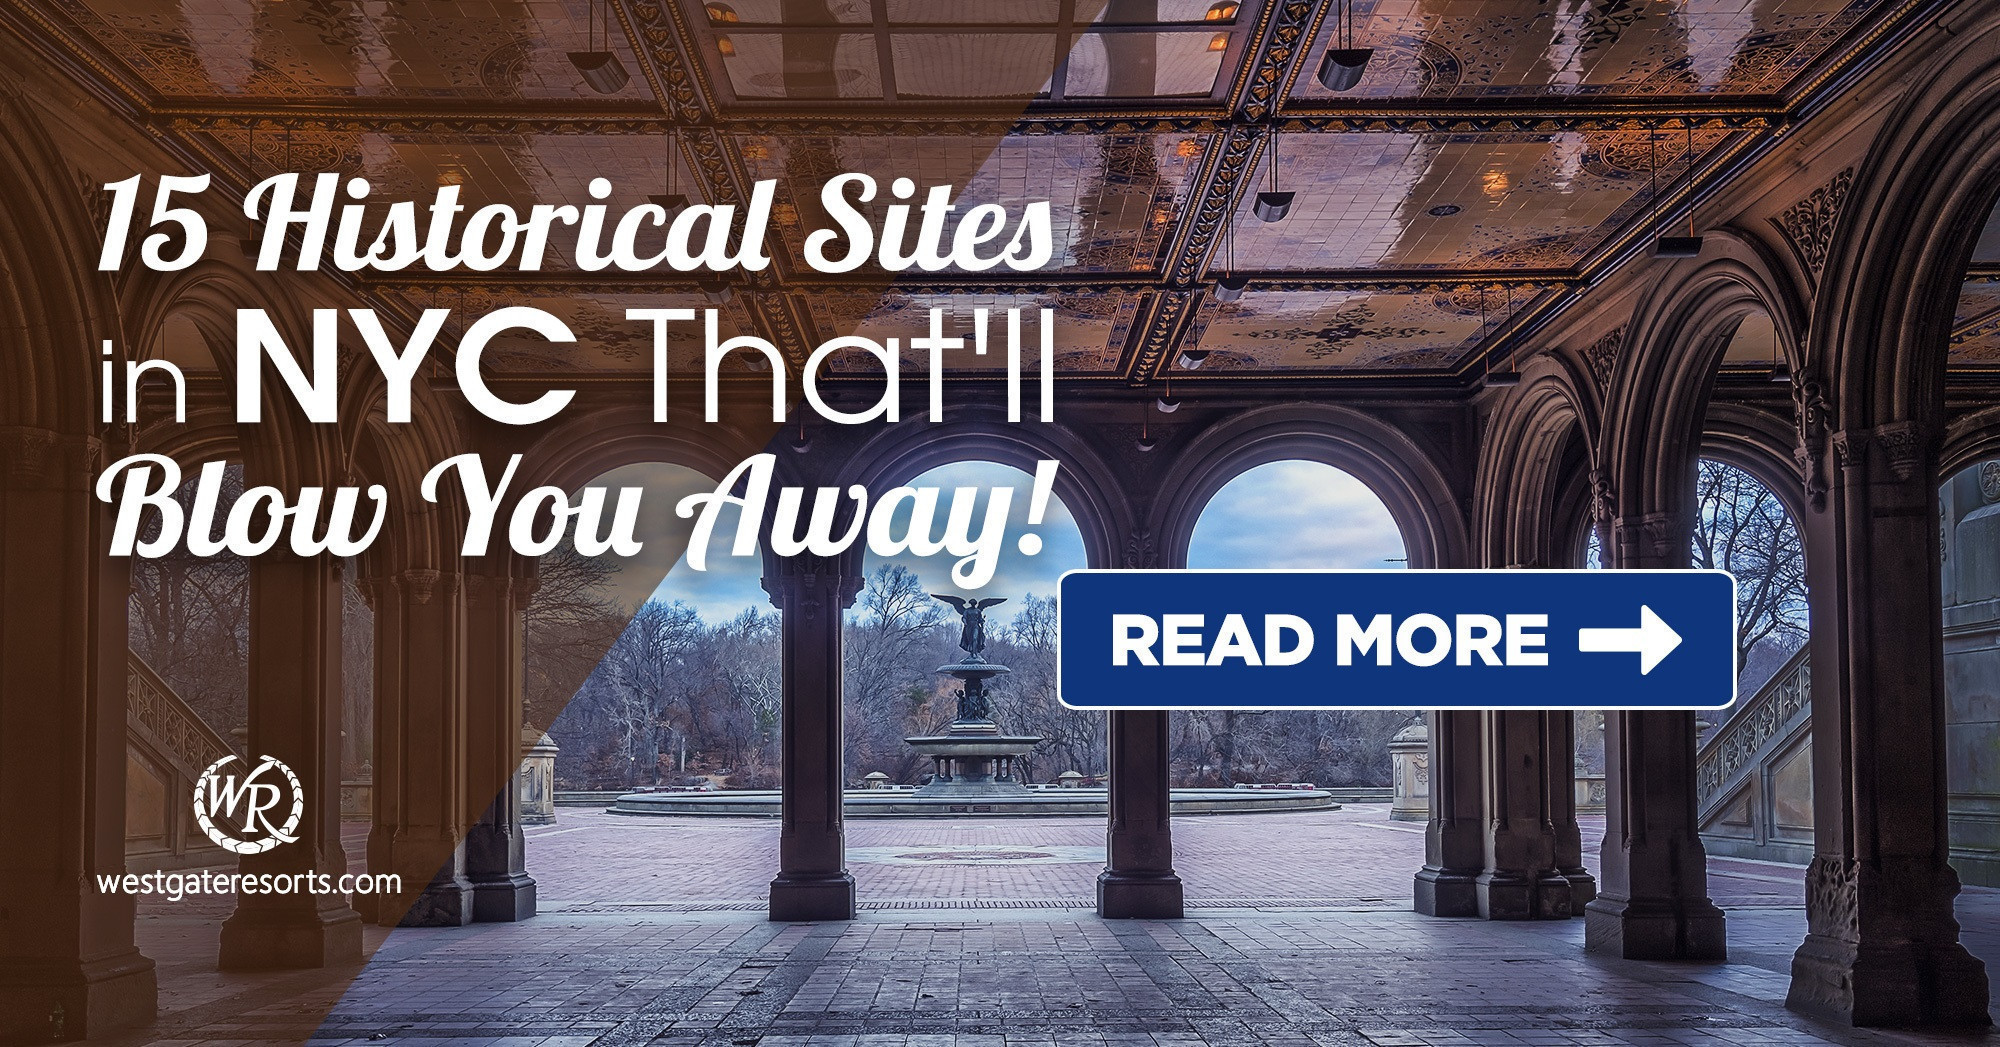 15 Historical Sites in NYC That'll Blow You Away!